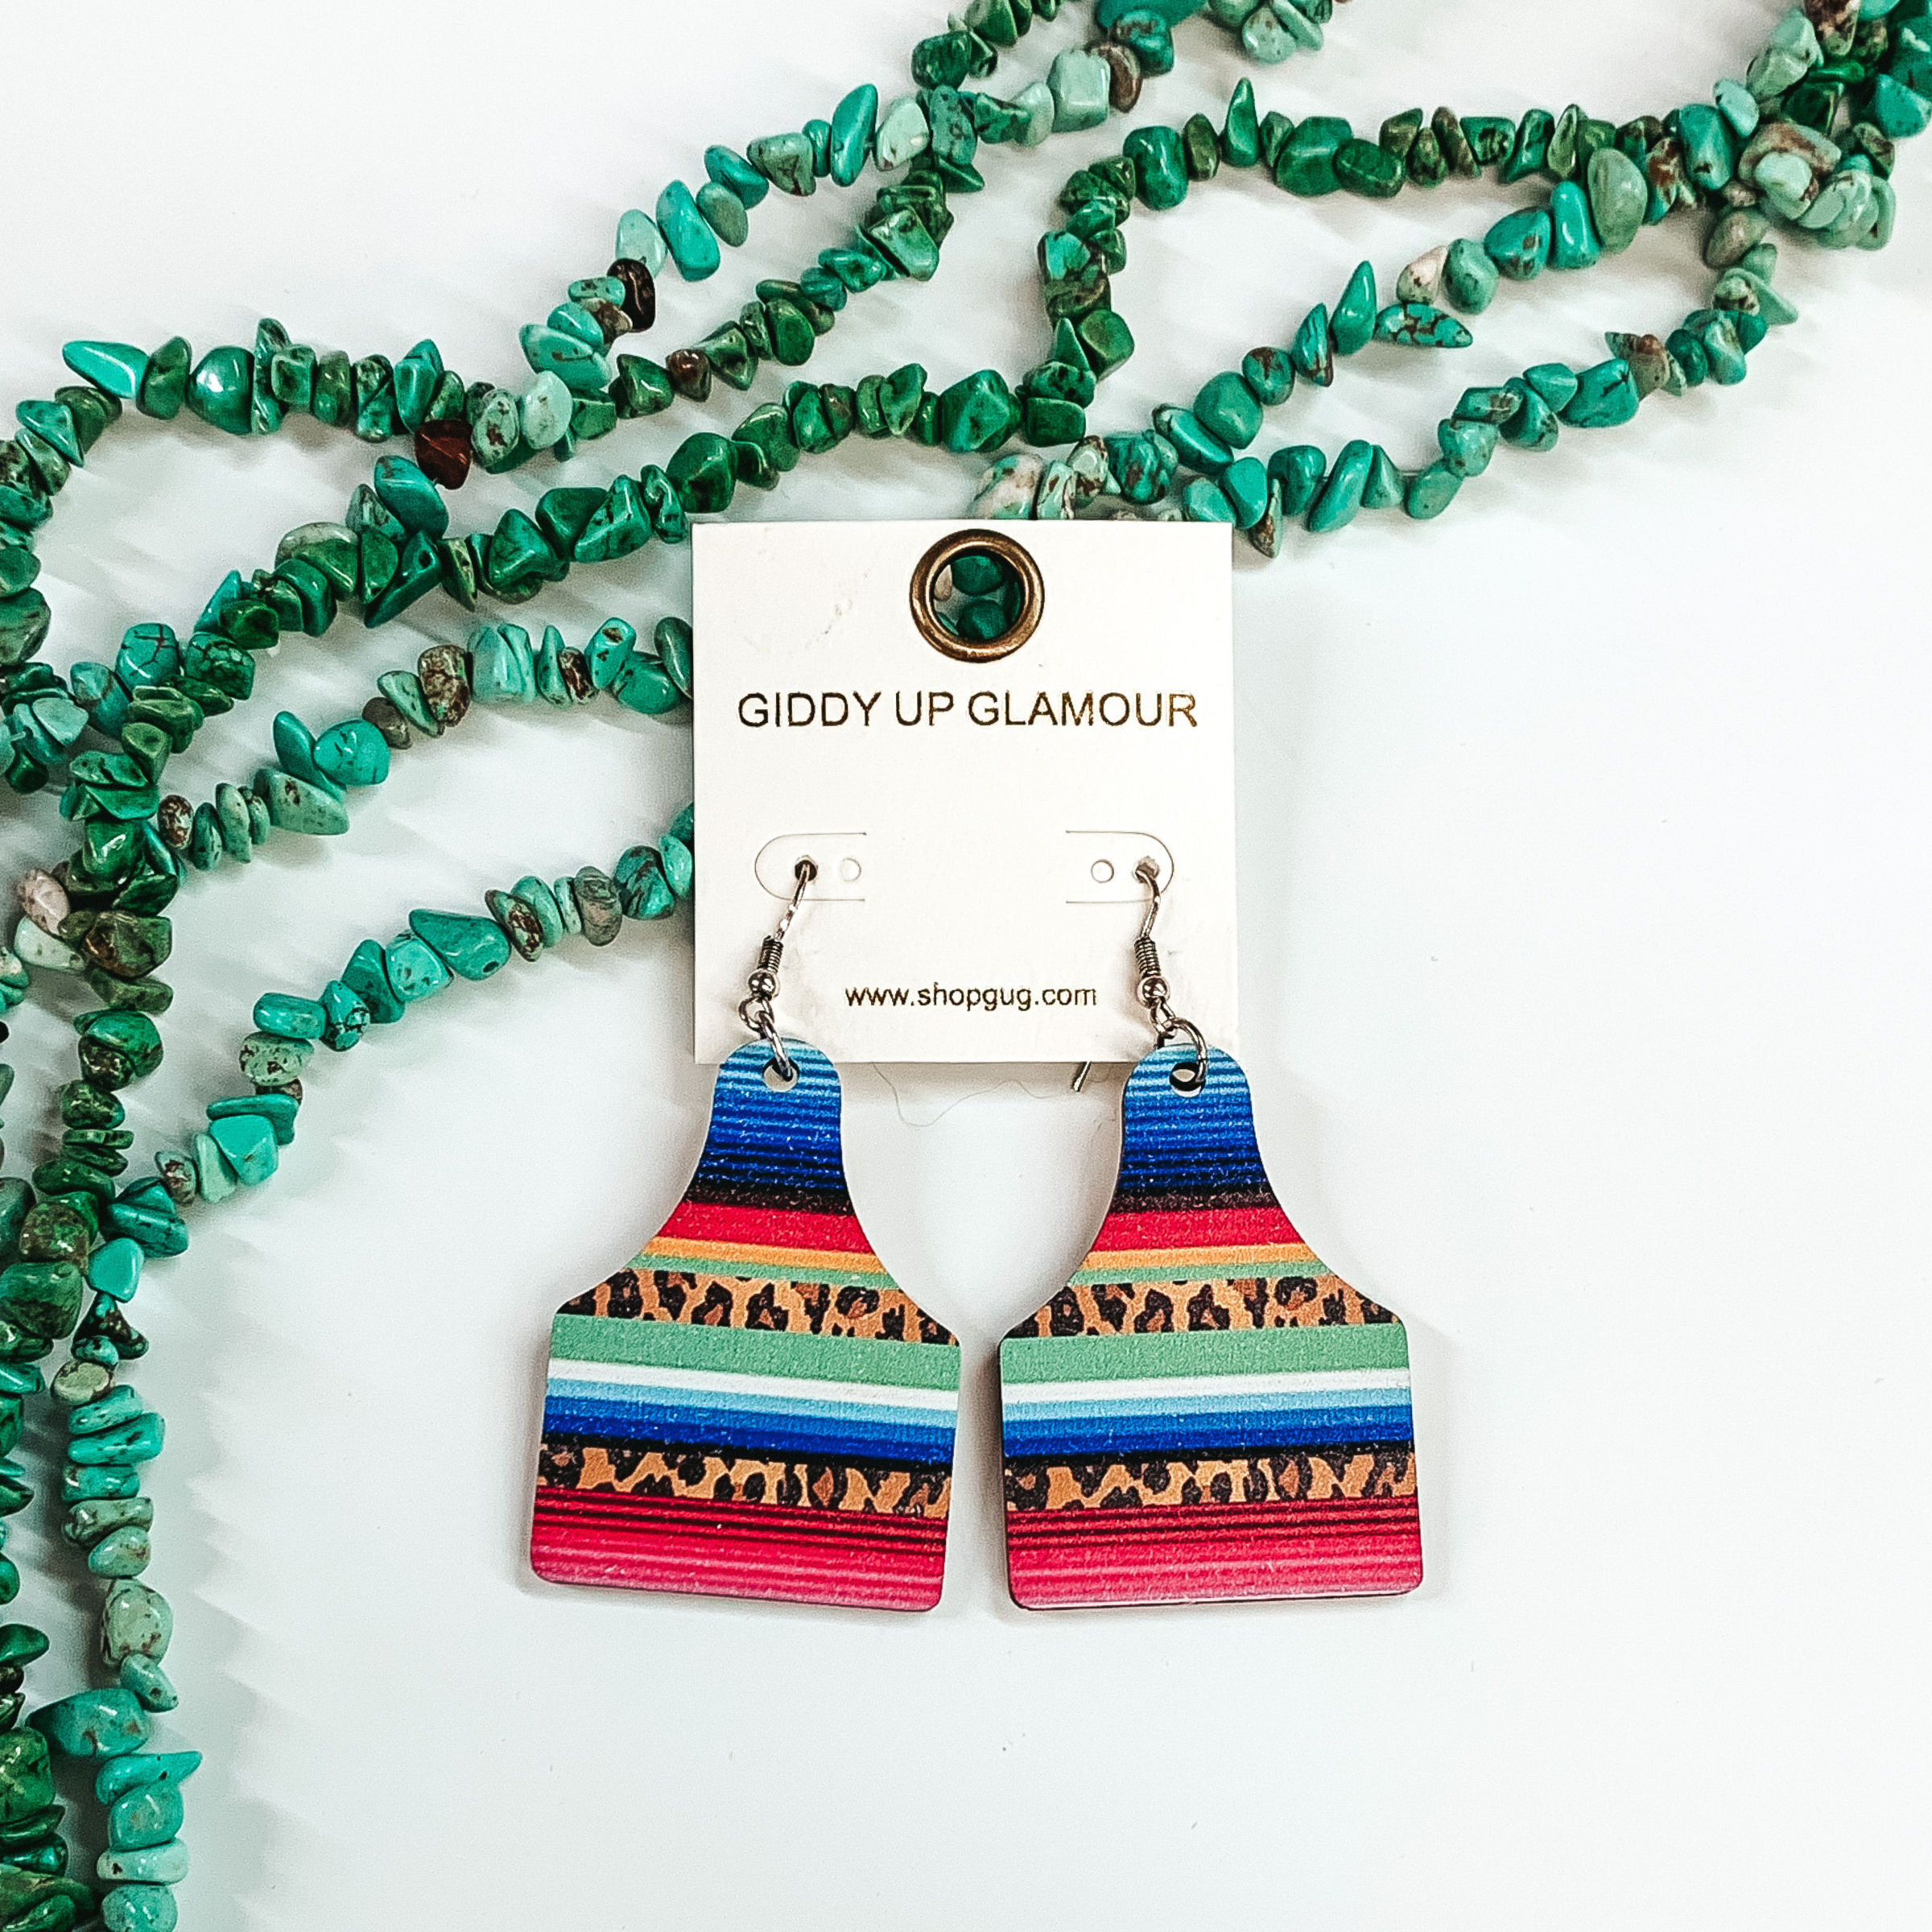 Wood Ear Tag Earrings in Serape/Leopard Print - Giddy Up Glamour Boutique